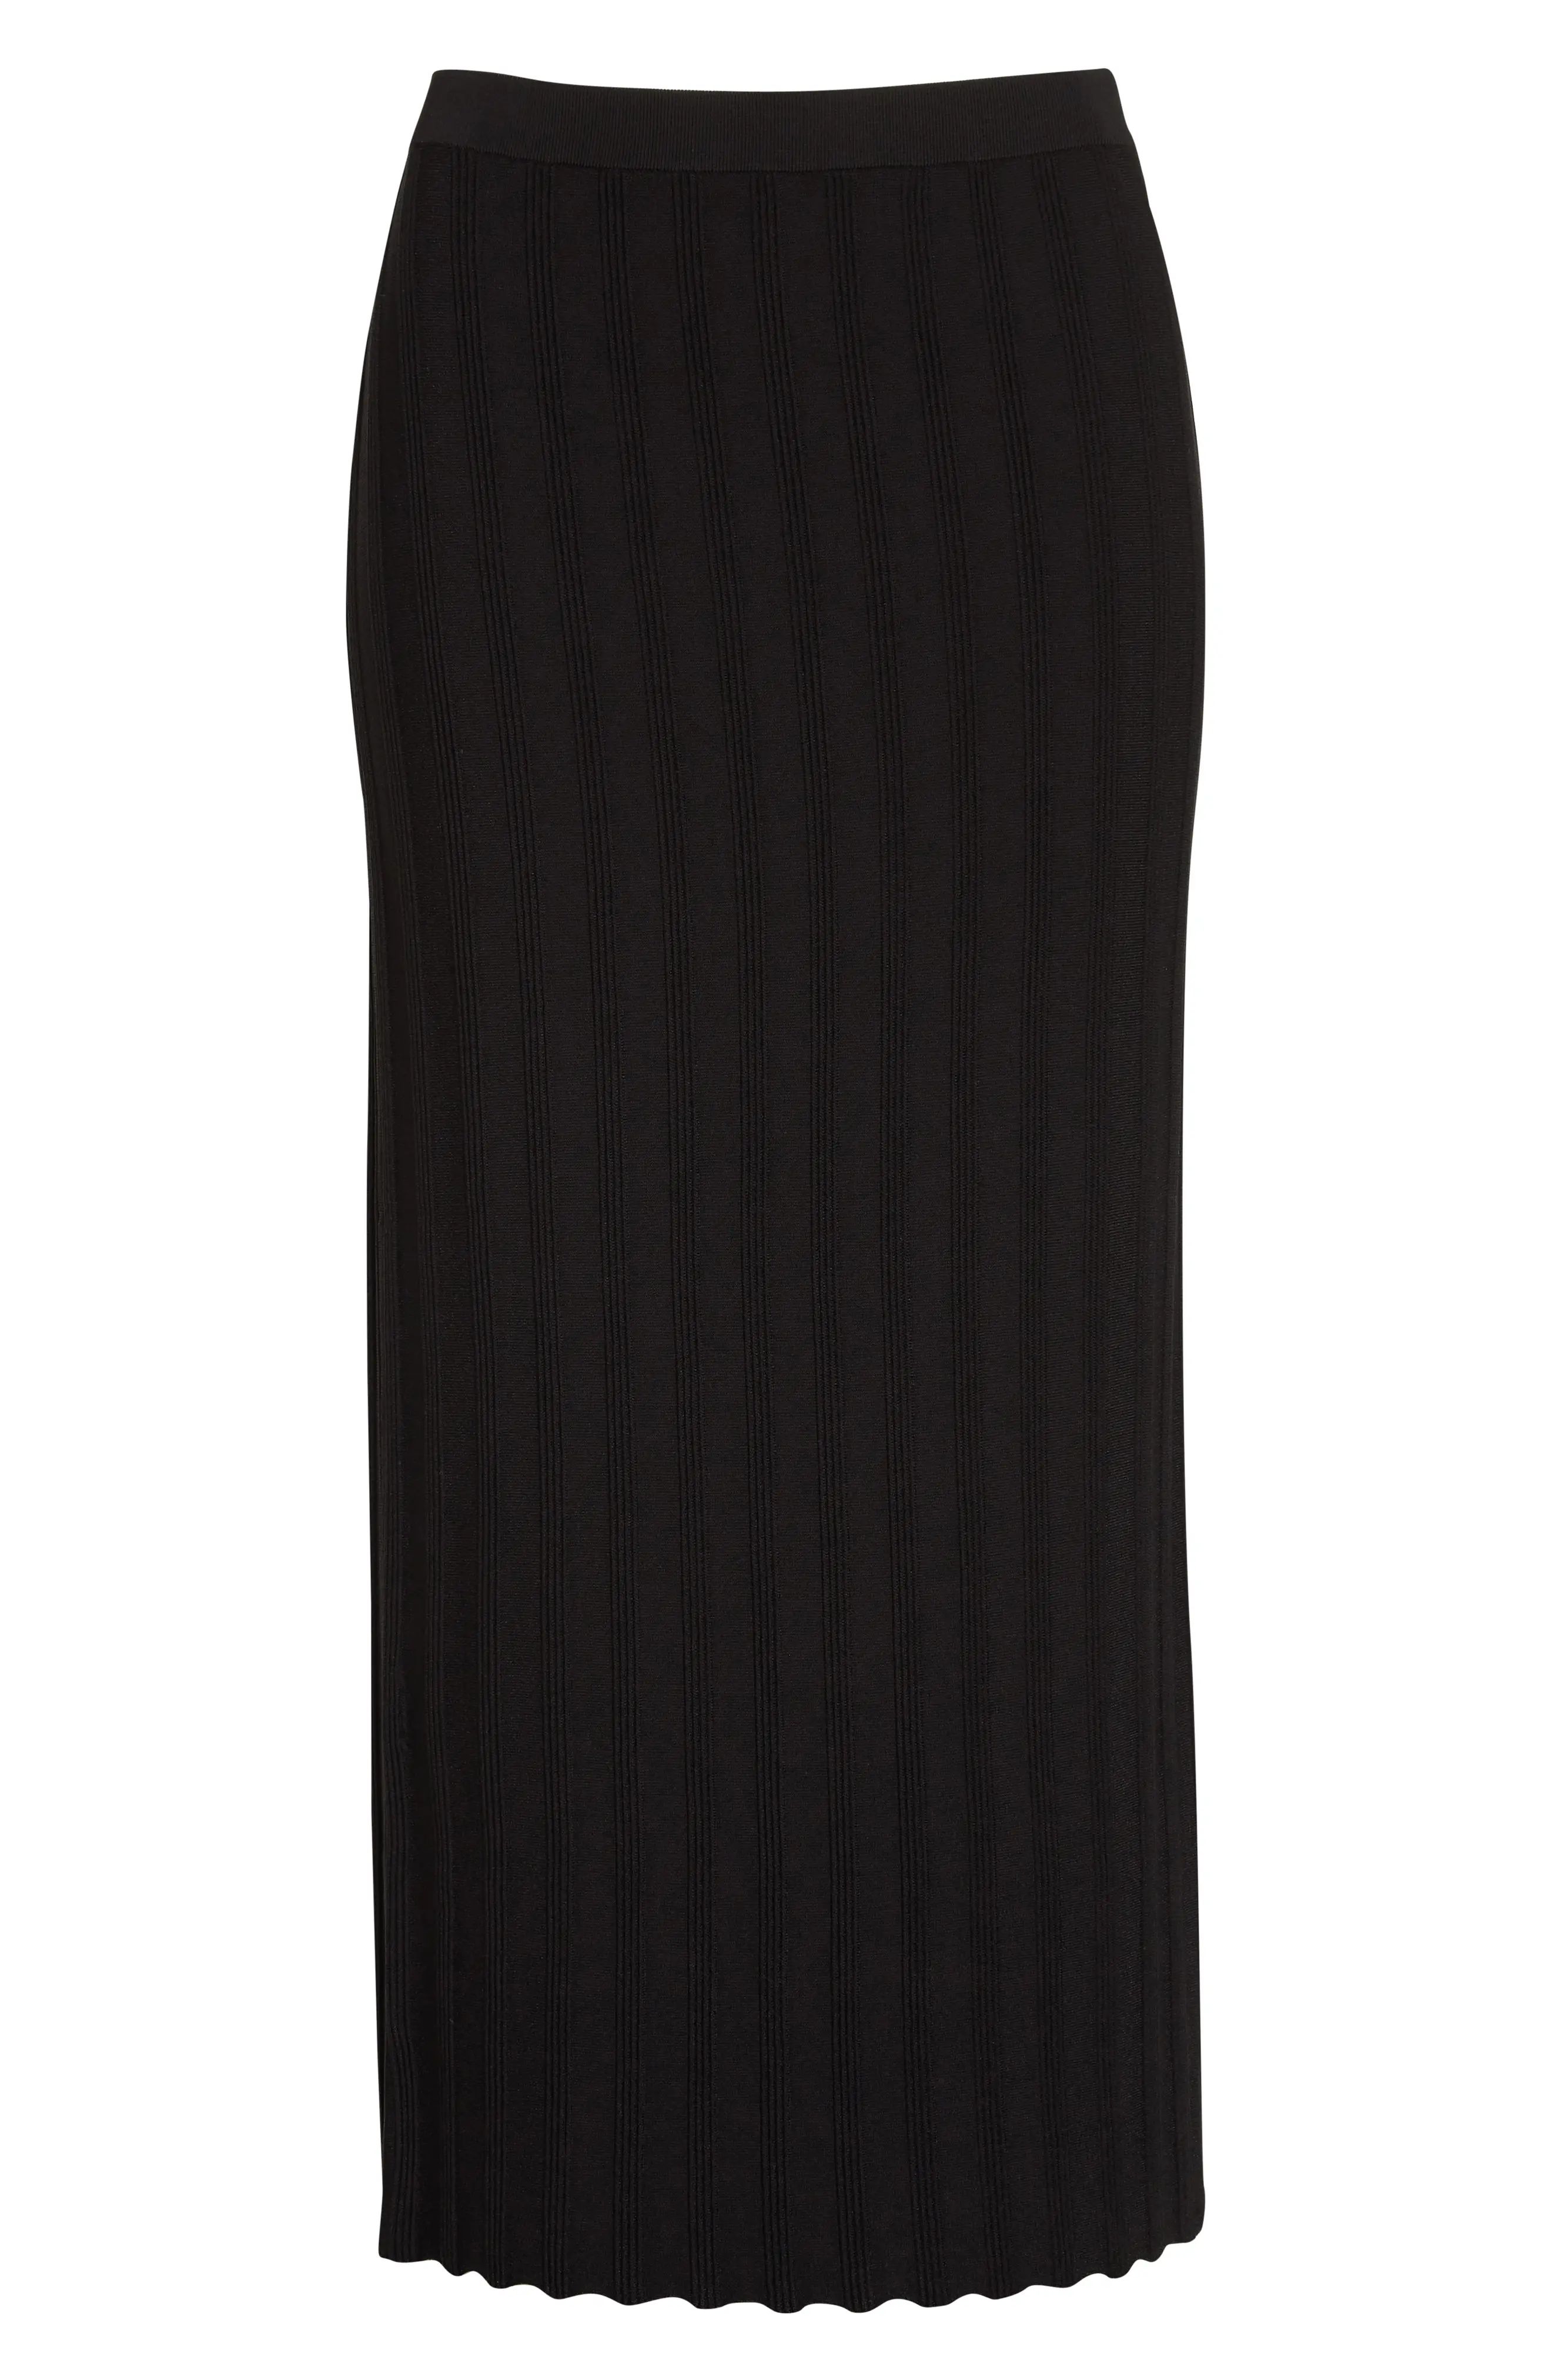 Nordstrom Signature Rib Sweater Pencil Skirt in Black at Nordstrom, Size X-Large | Nordstrom